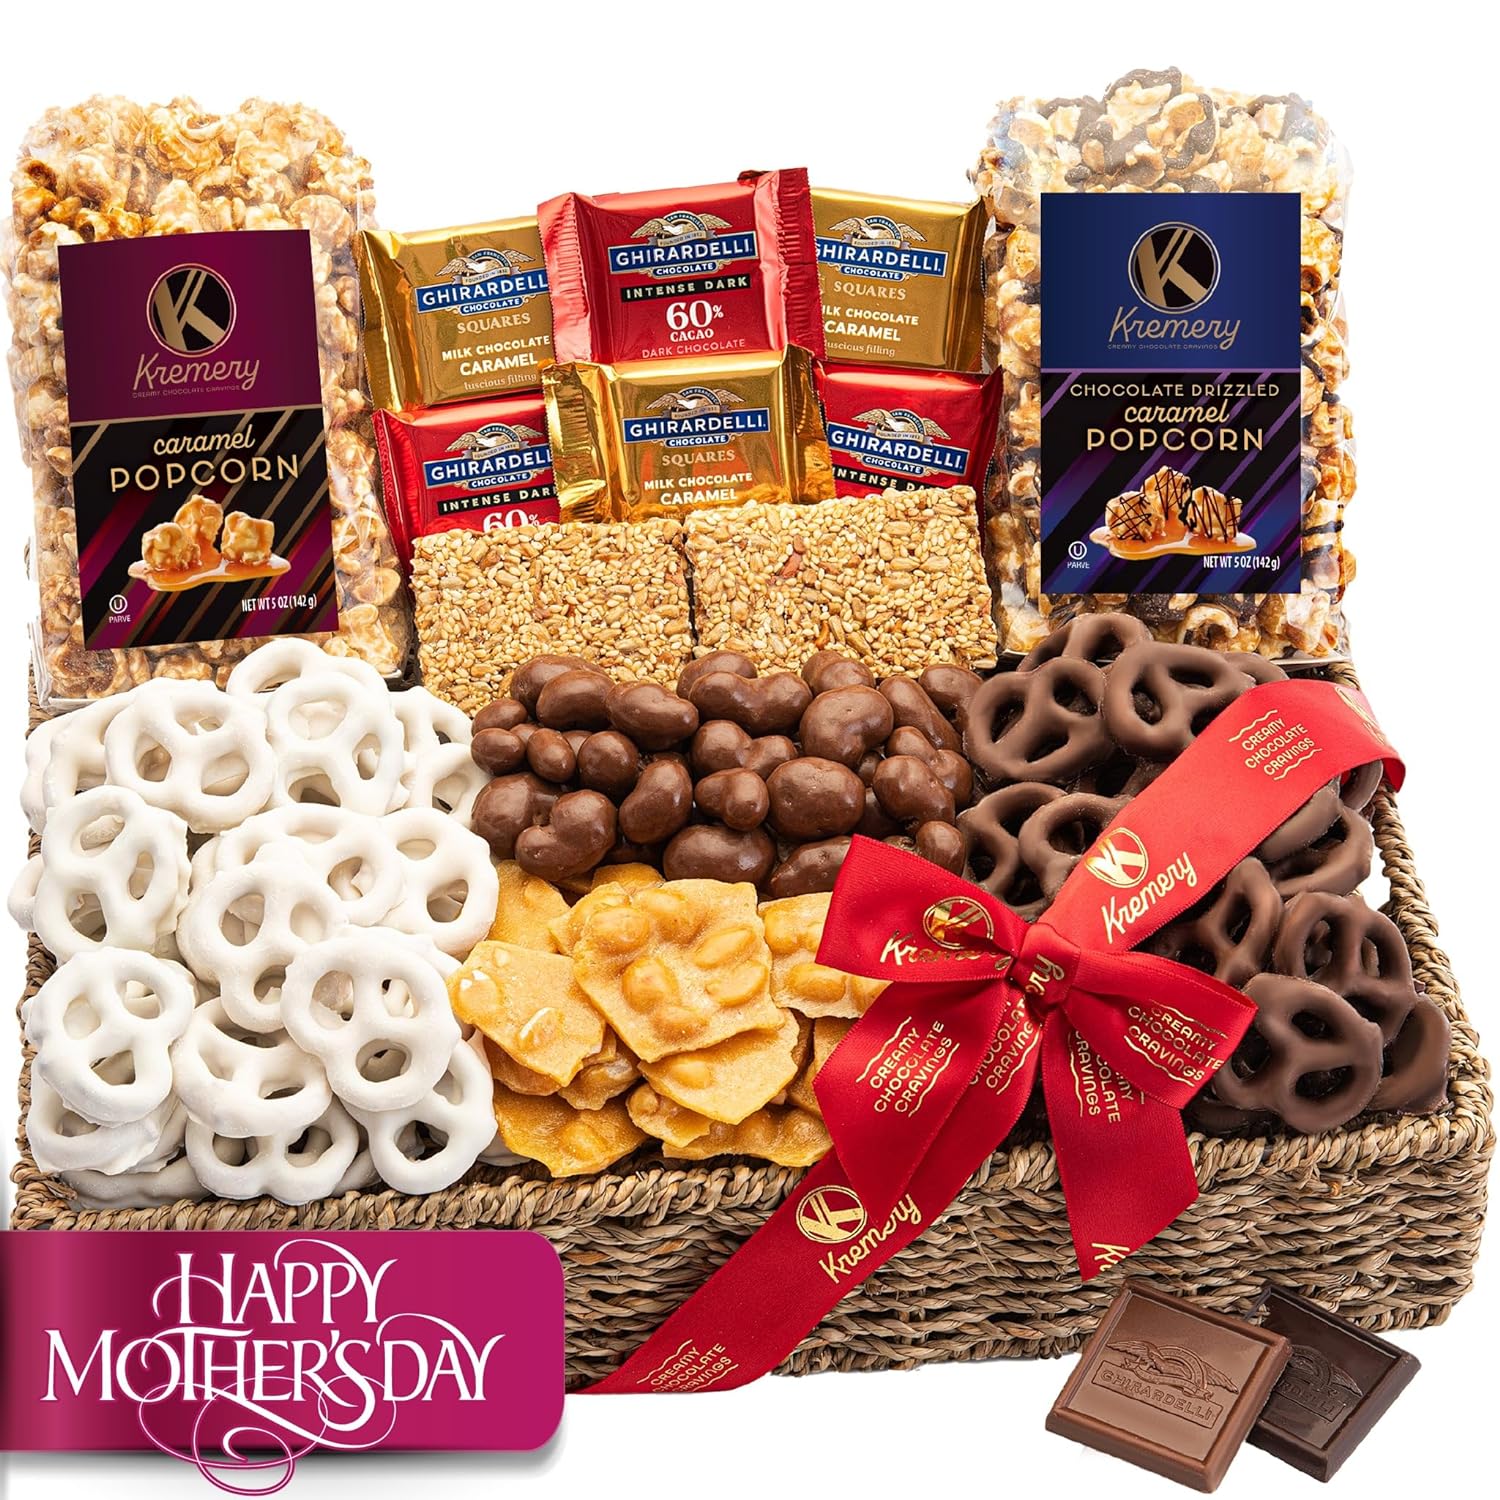 KREMERY Creamy Chocolate Cravings - Mothers Day Chocolate Covered Pretzels Gift Basket in Reusable Seagrass Tray + Ribbon, Caramel Popcorn Peanut Brittle Cashews (Large 3.5 LB) Kosher Dairy USA Made